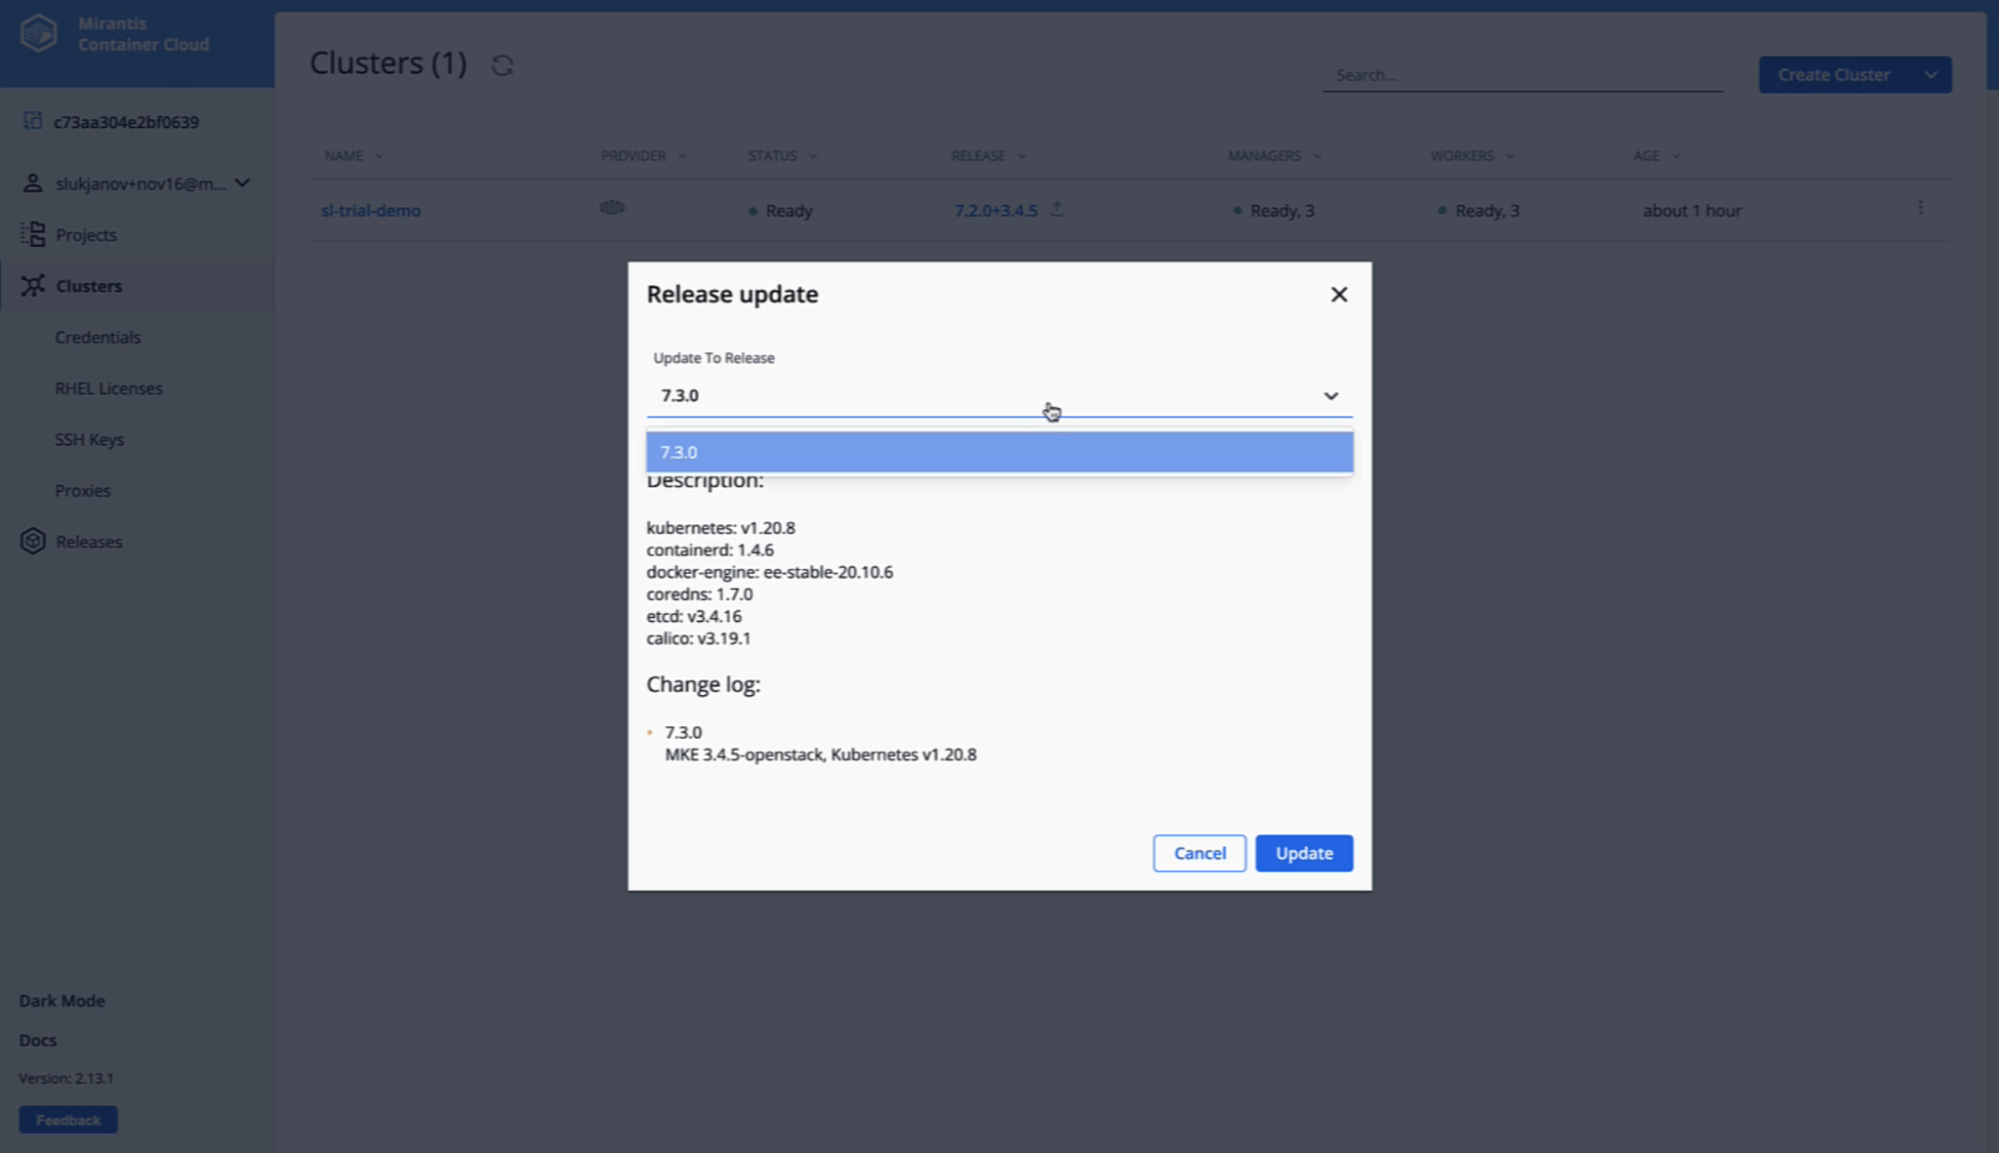 choose release update version in mirantis container cloud gui